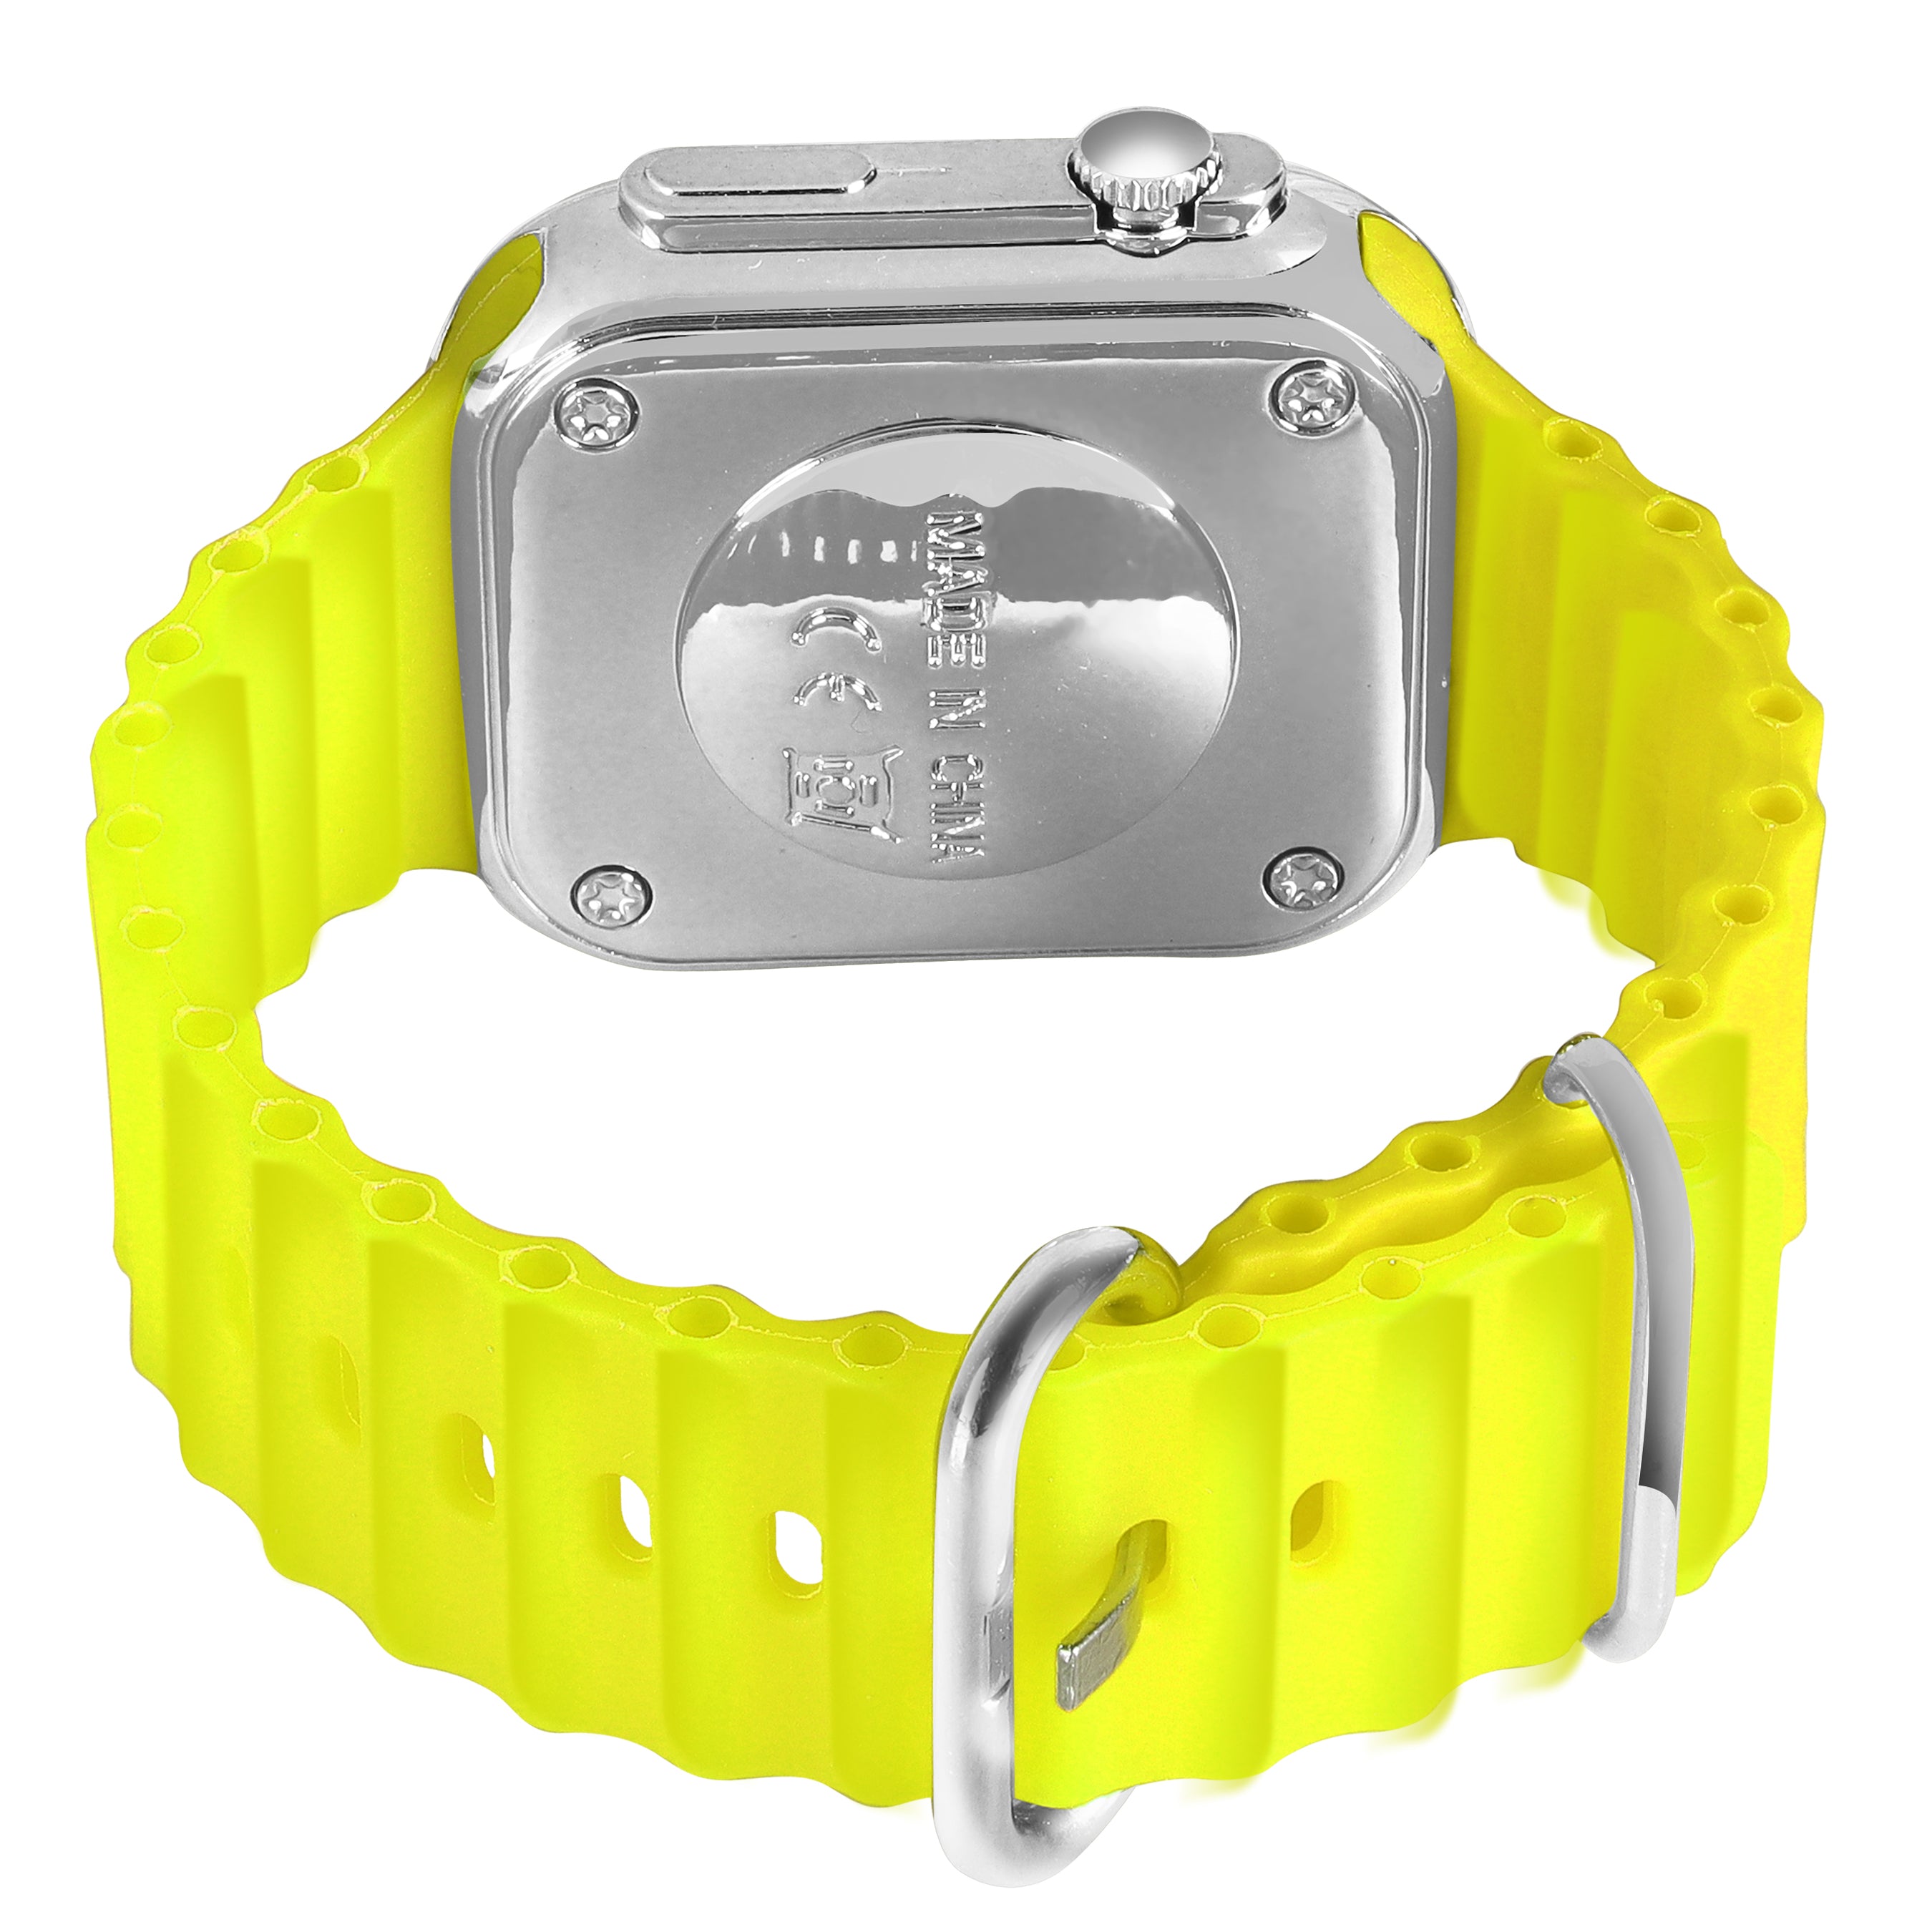 LOIS CARON D-1036 Teenagers LED Luxurious Fashion Silicone Digital Watch - For Boys & Girls